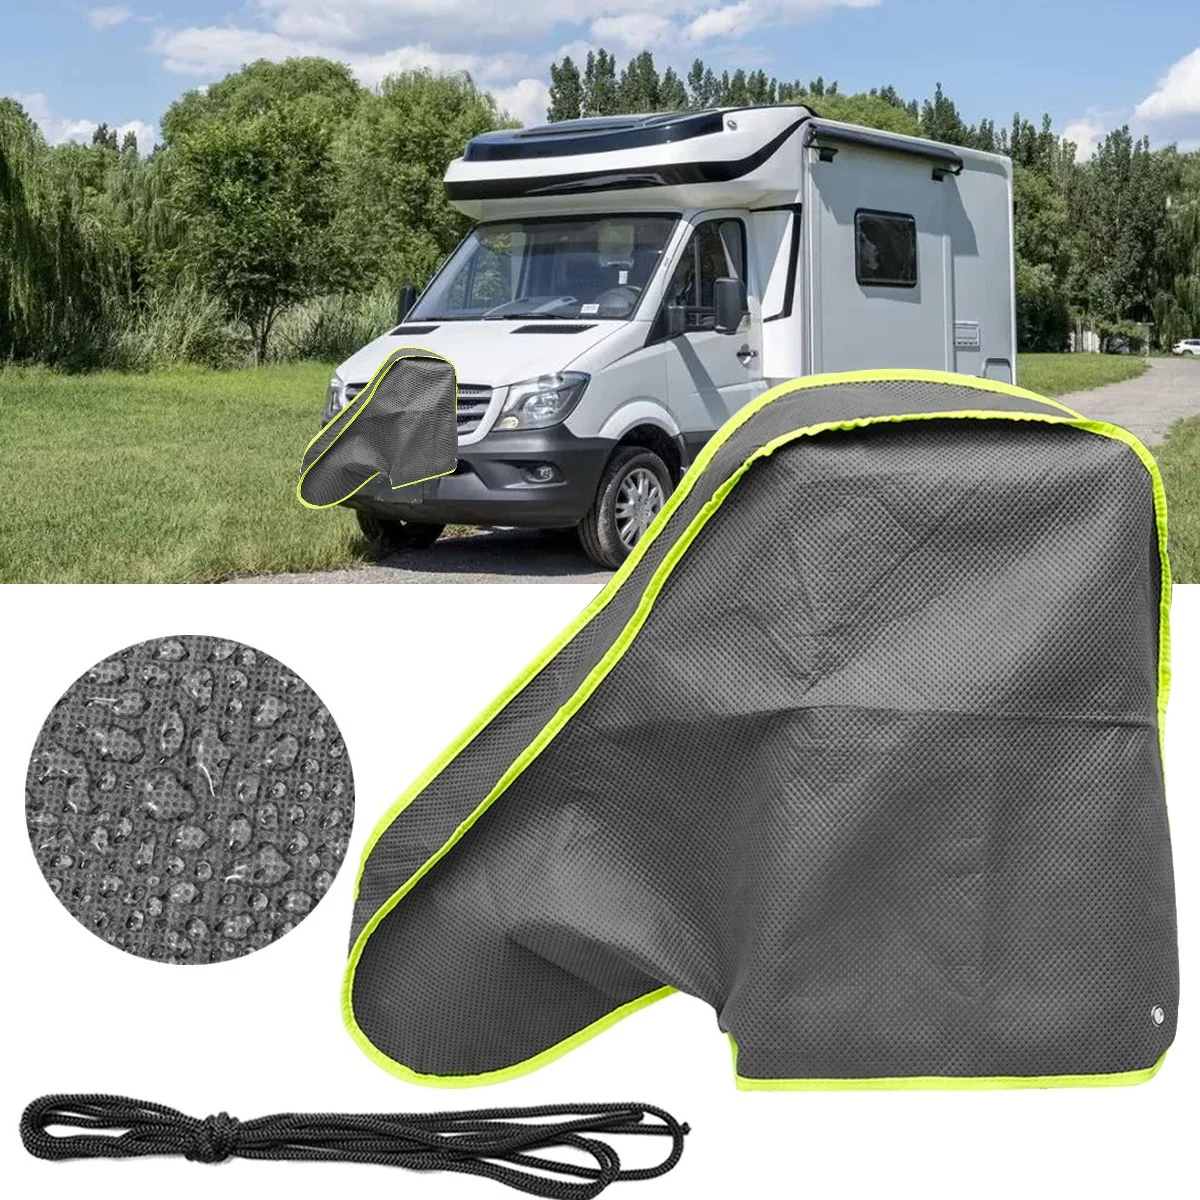 

With Luminous Strip, 4-layer Non-woven Protective Cover, Waterproof Cover, Dust Cover, Trailer Connector Cover For SUV